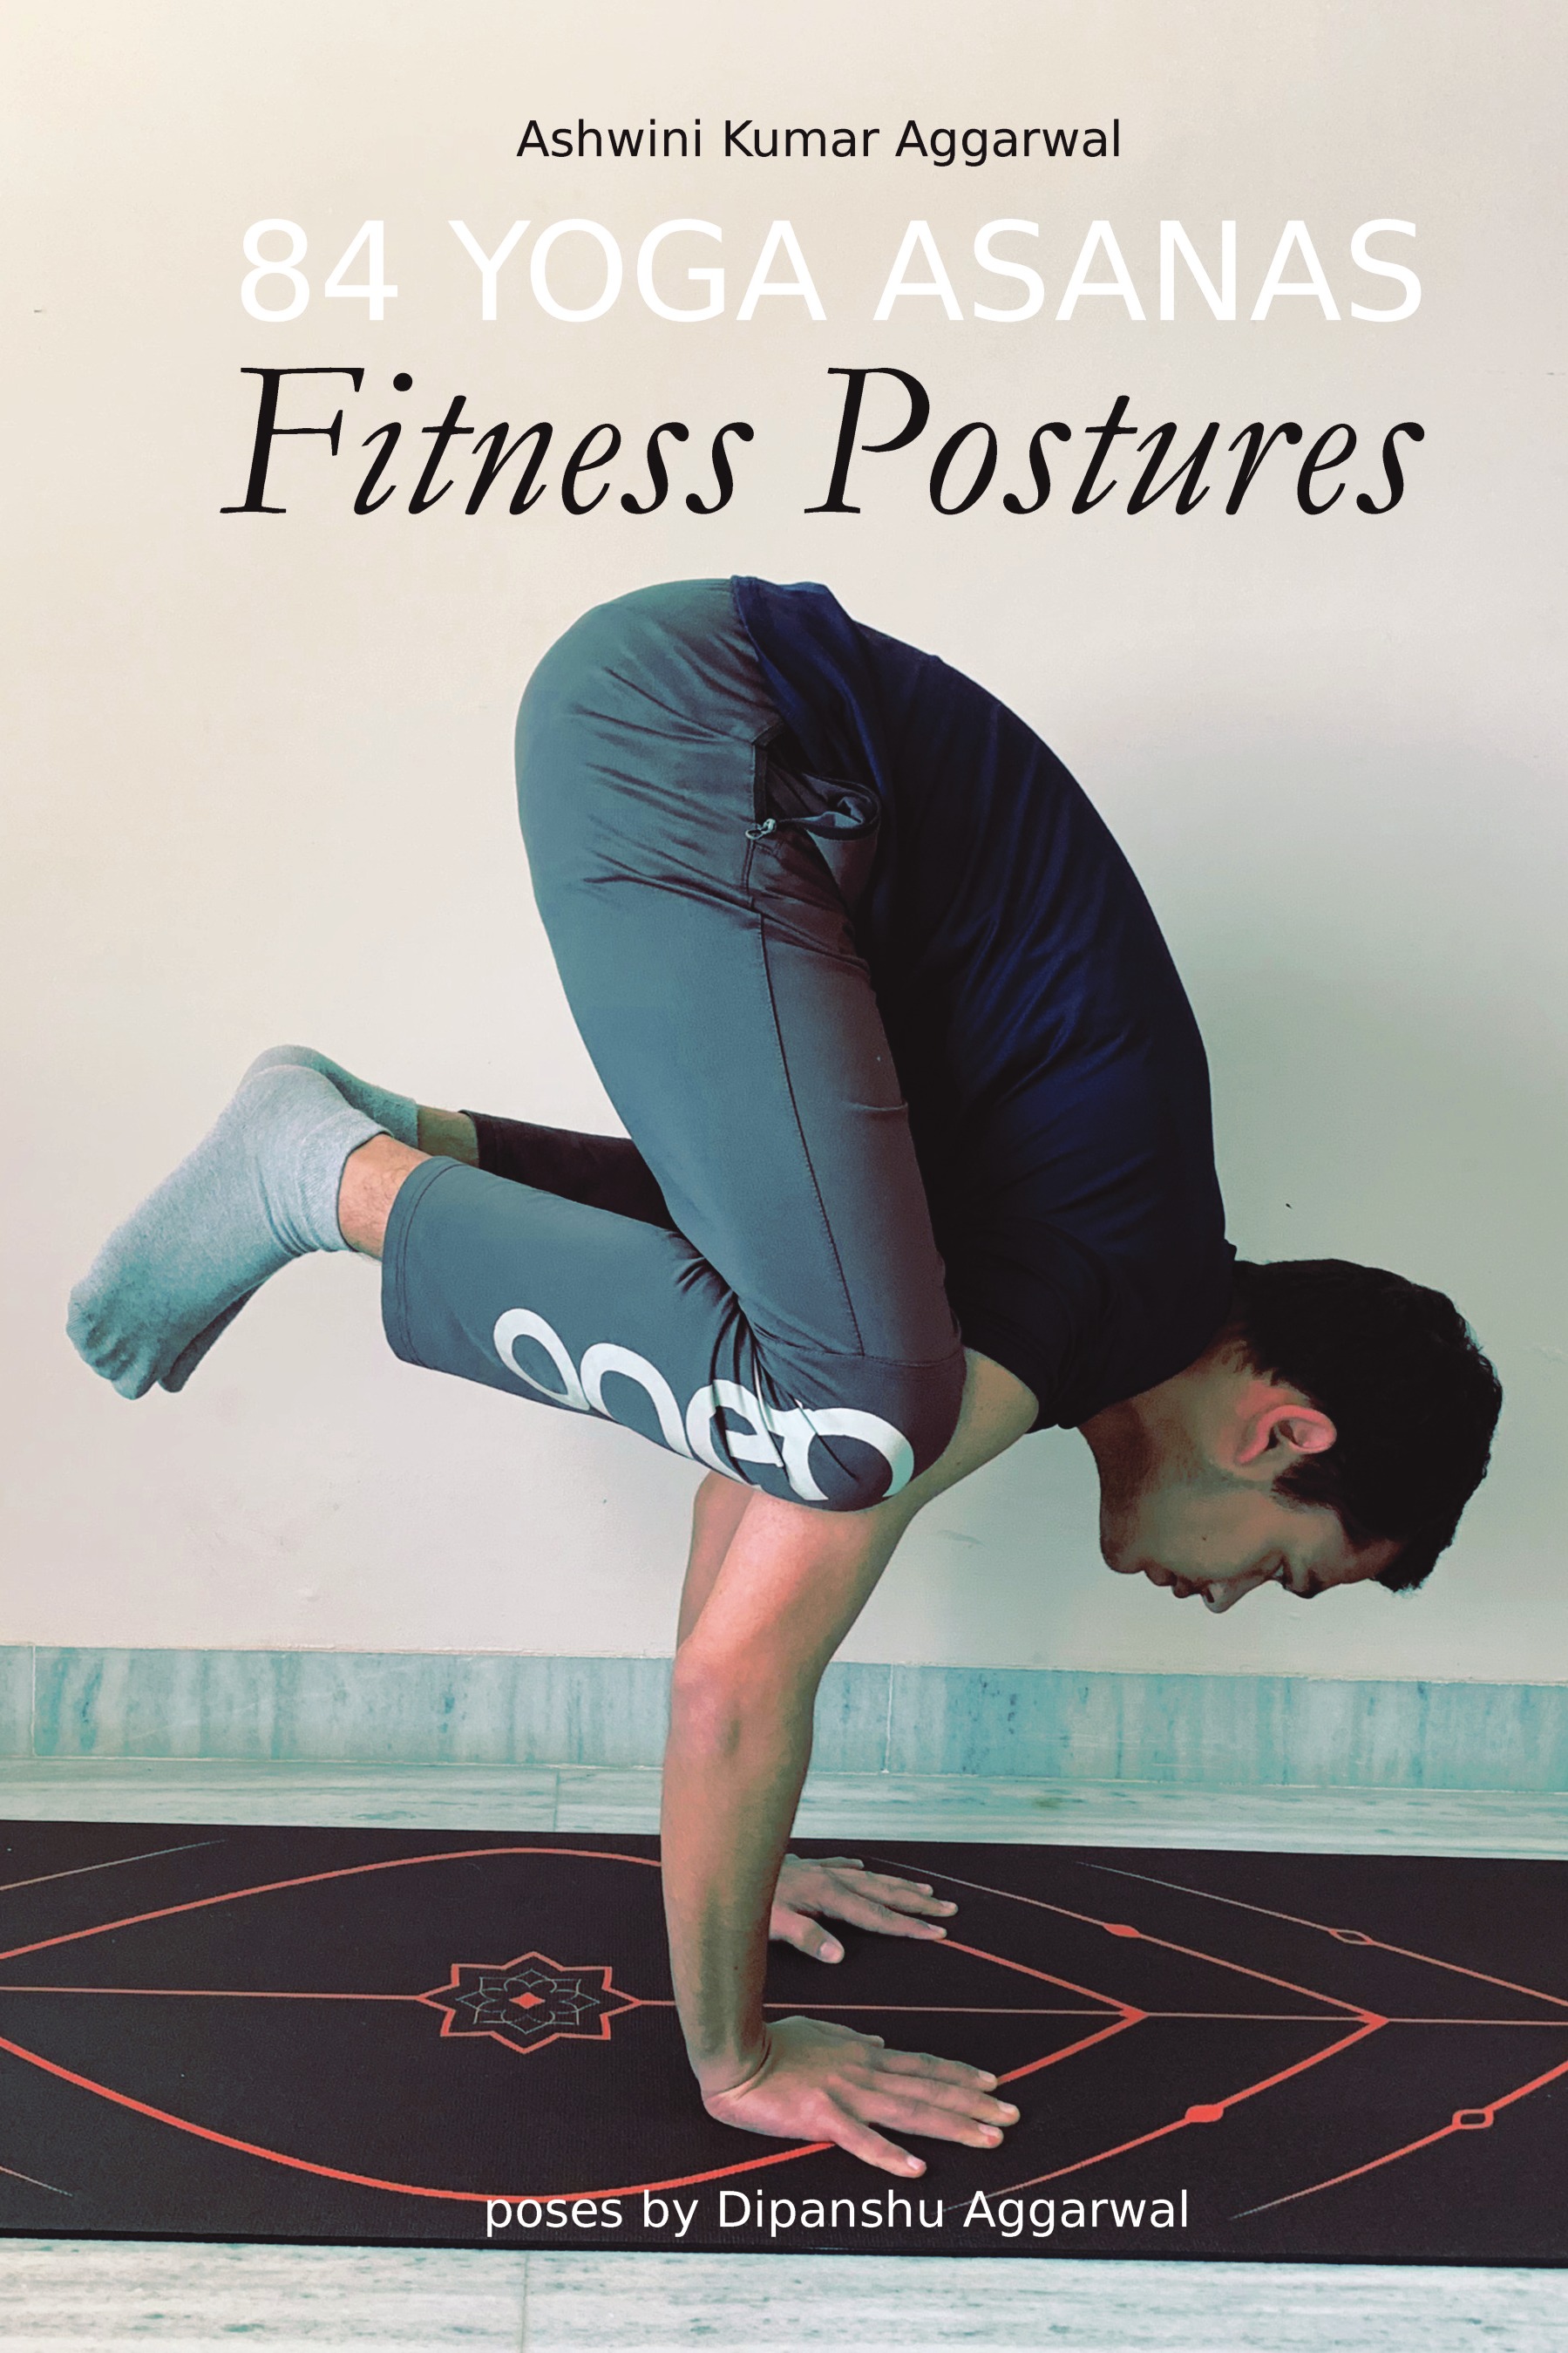 25 Poses to Advance Your Practice - YOGA PRACTICE